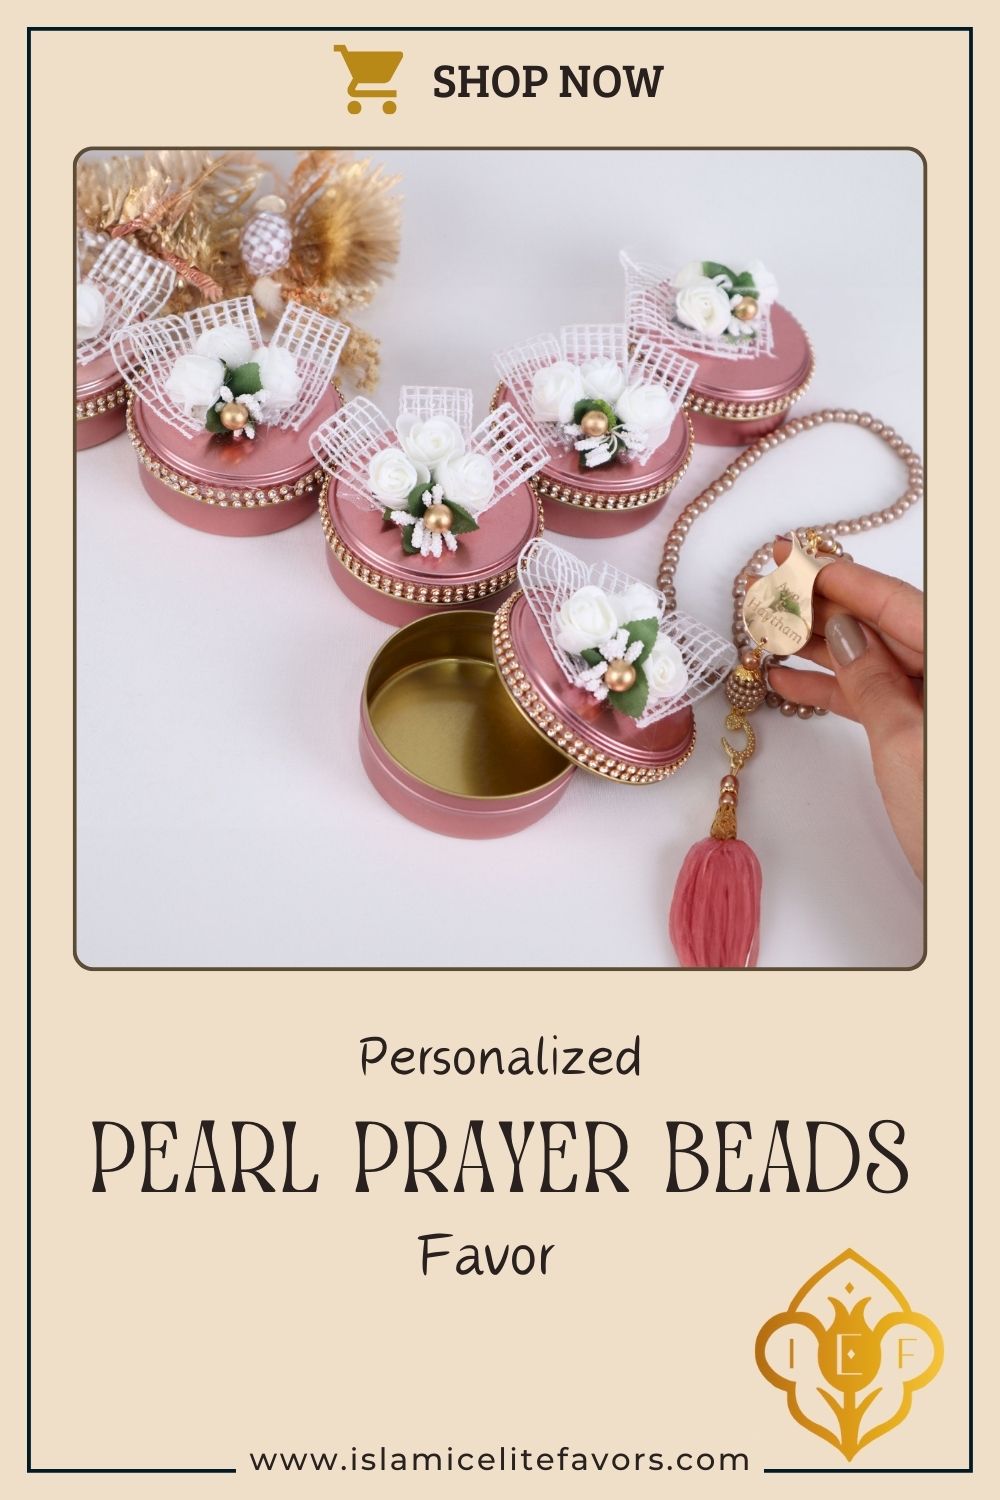 Personalized Pearl Prayer Beads in Metal Box Islamic Wedding Favors - Islamic Elite Favors is a handmade gift shop offering a wide variety of unique and personalized gifts for all occasions. Whether you're looking for the perfect Ramadan, Eid, Hajj, wedding gift or something special for a birthday, baby shower or anniversary, we have something for everyone. High quality, made with love.